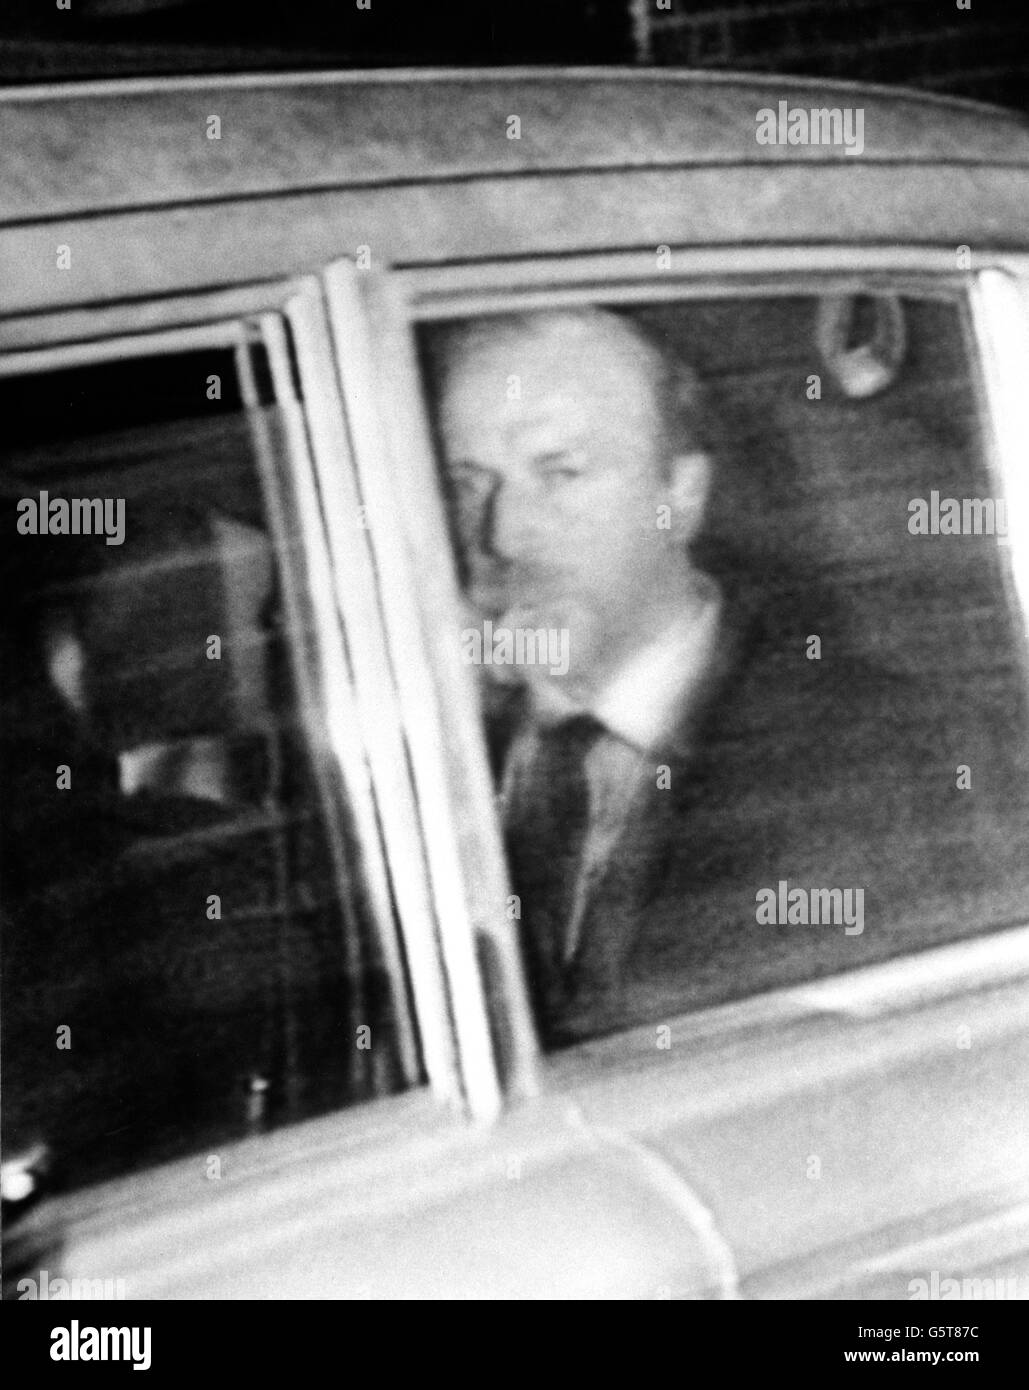 Former London gang leader Charles Richardson, being driven away from Coldingley Prison, near Woking, Surrey, for a four-day break away from prison to spend time with his family. Richardson is serving a 25-year sentence for crimes of violence, but could be released next July after serving more than 17 years of his punishment. Stock Photo